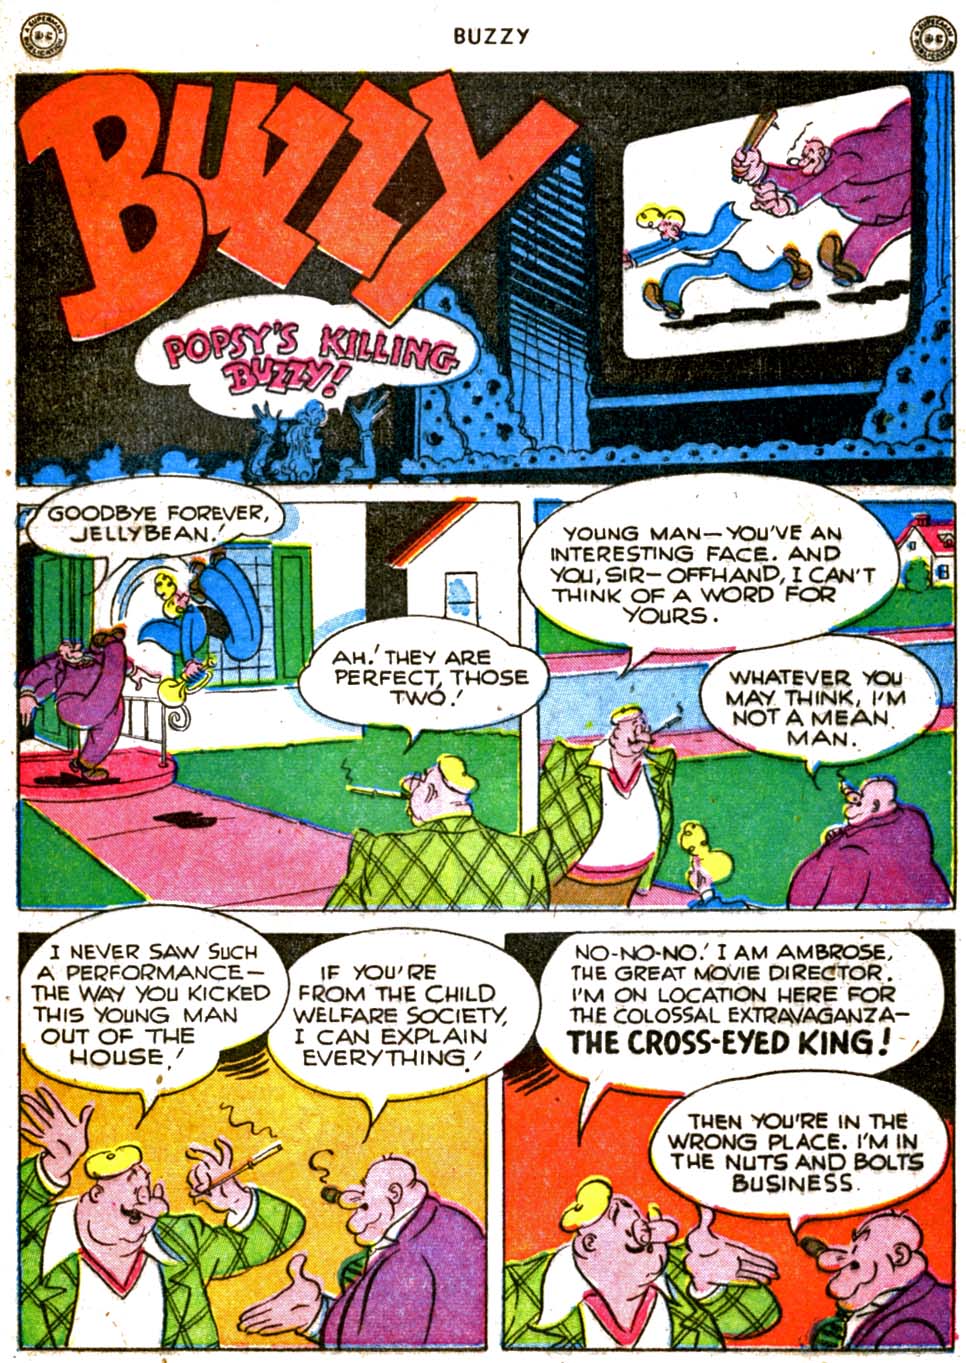 Read online Buzzy comic -  Issue #11 - 43